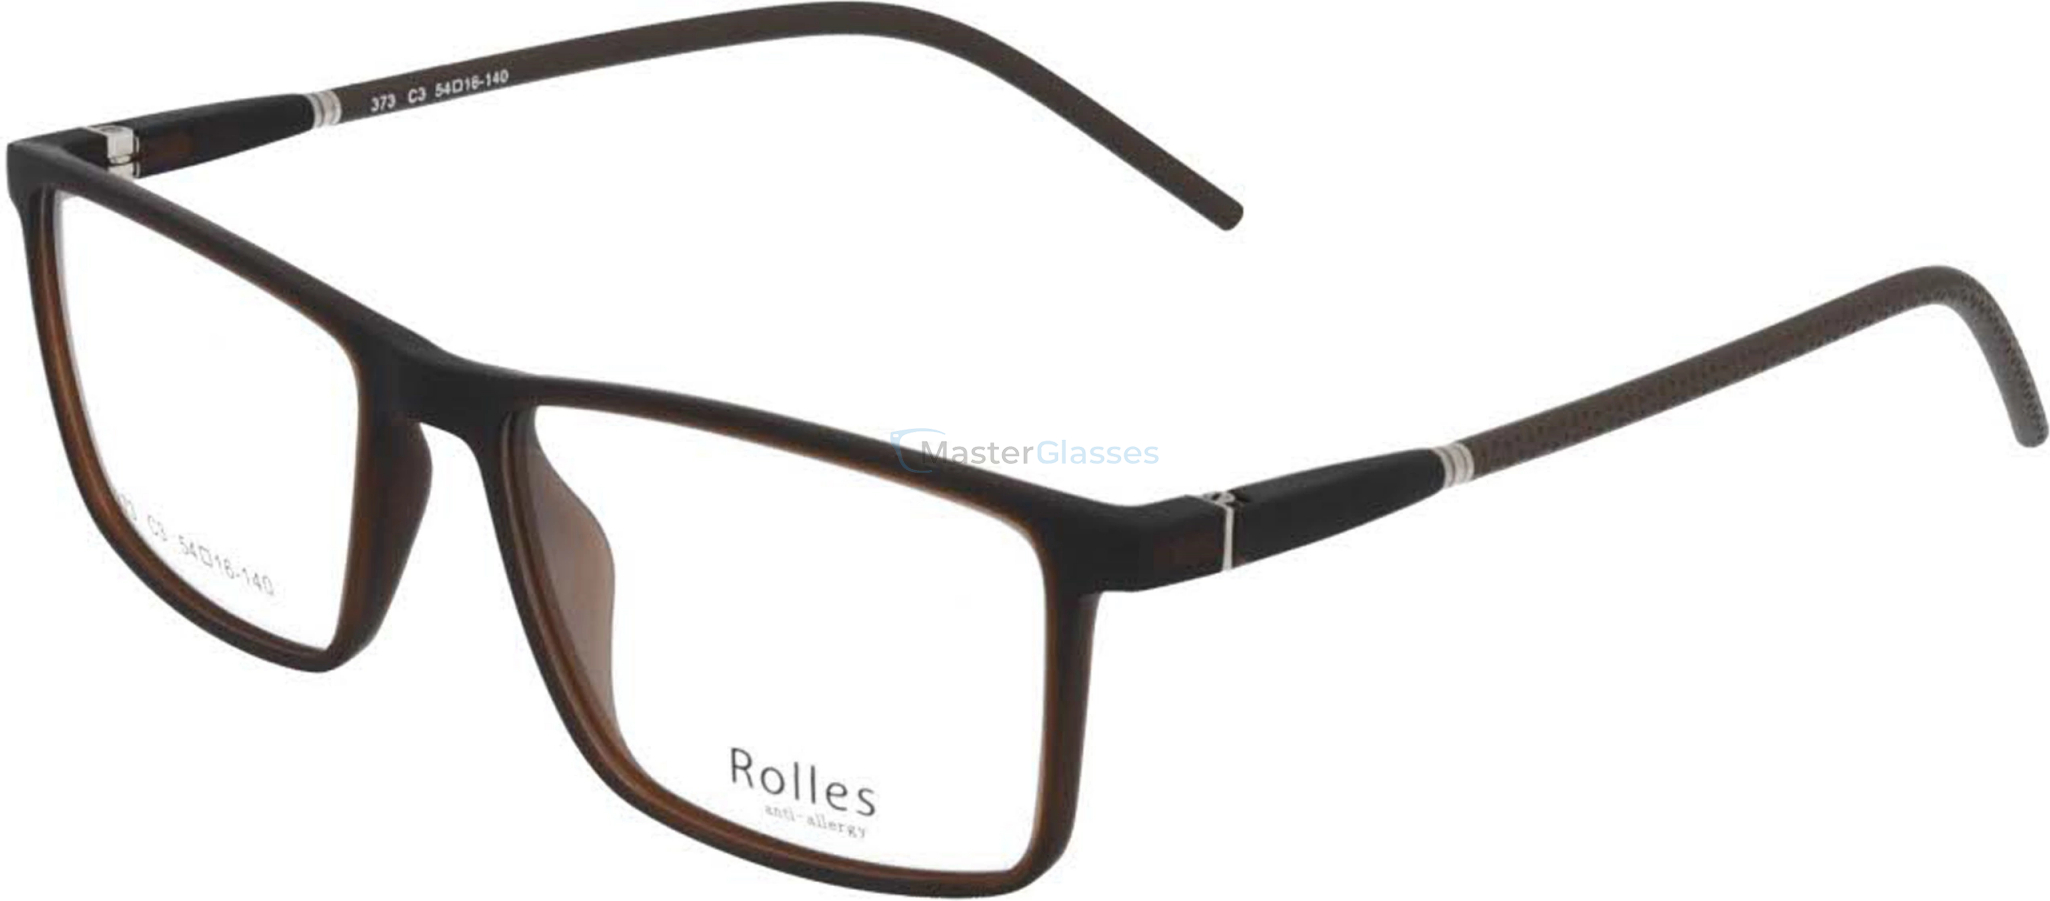  Rolles 373 03